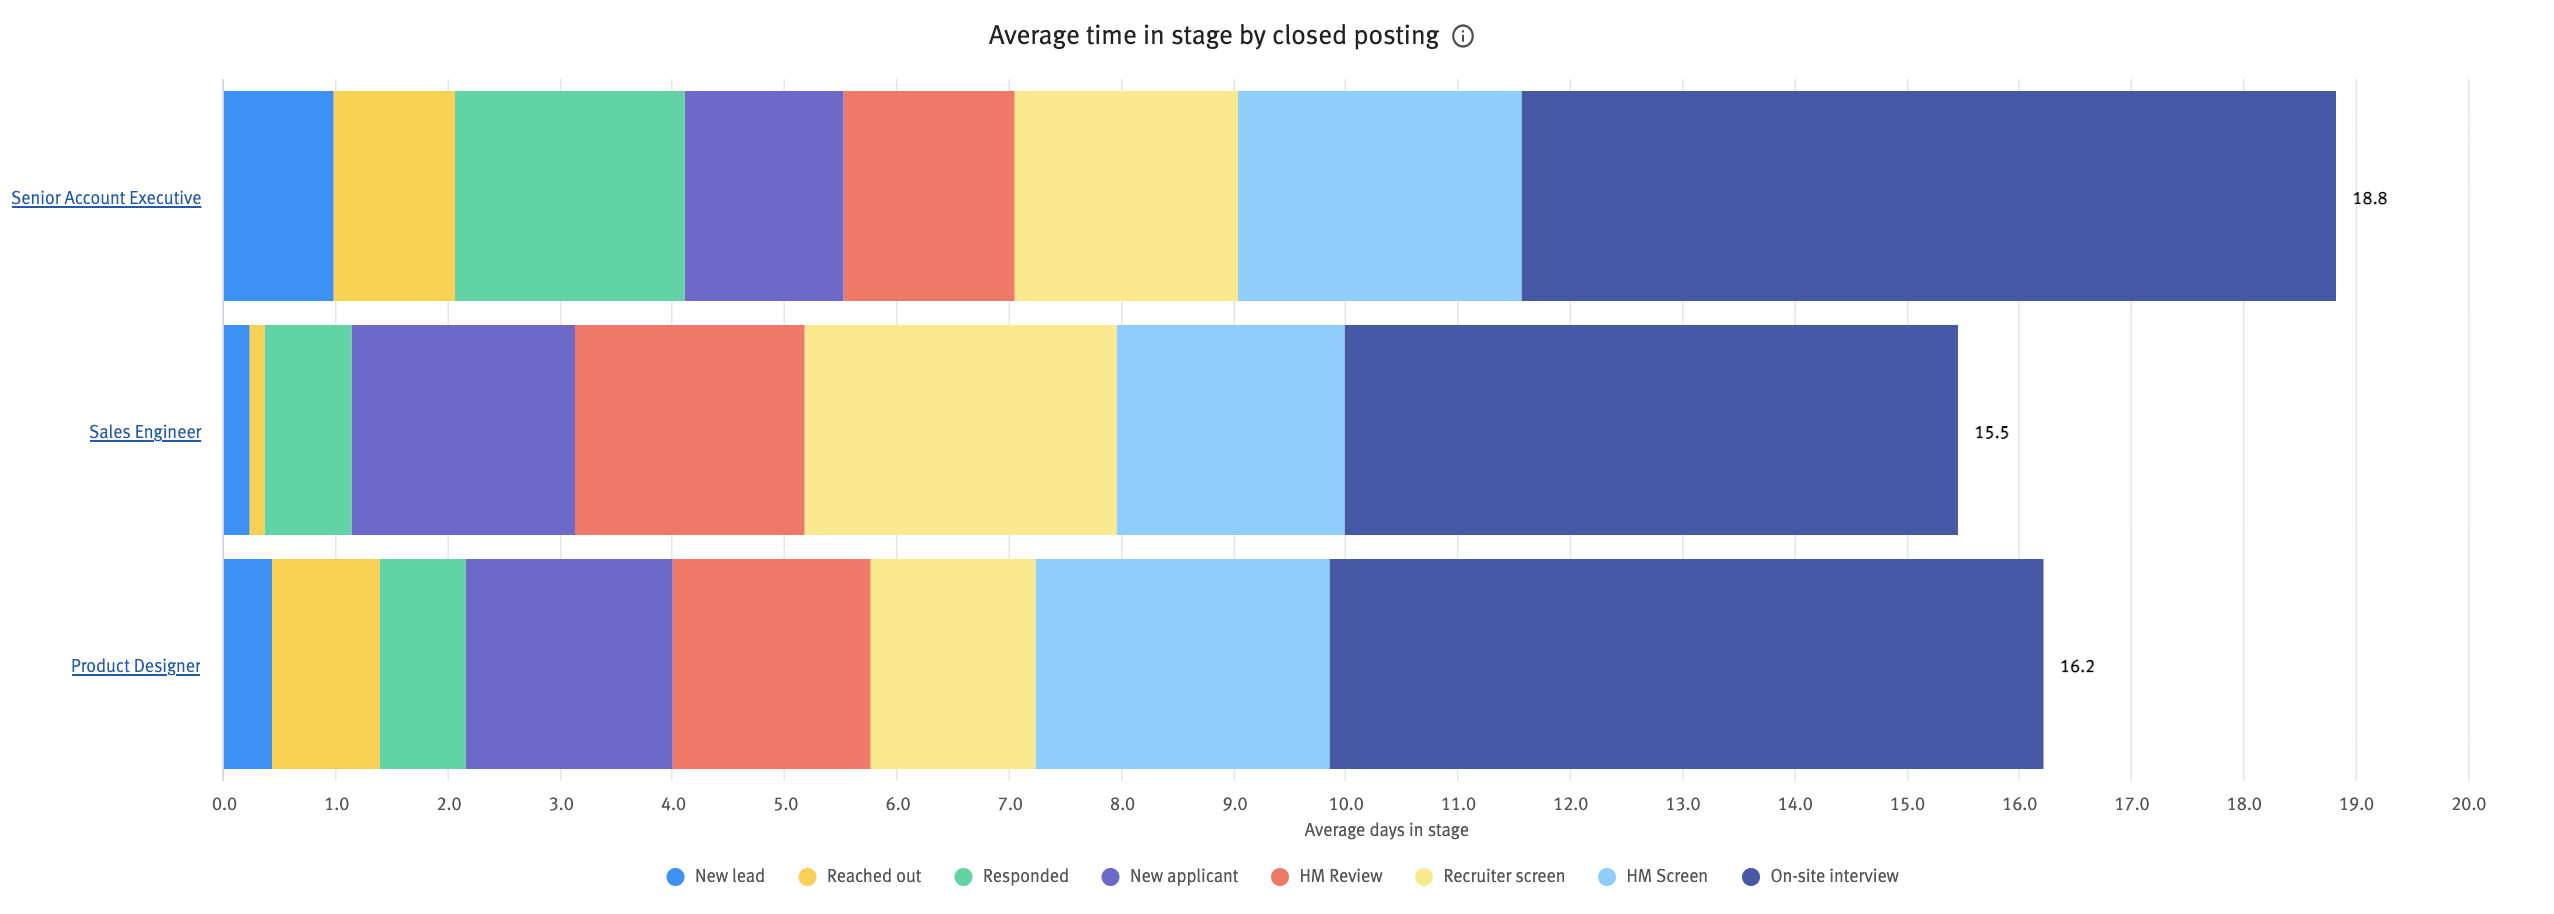 Average time in stage by closed posting chart